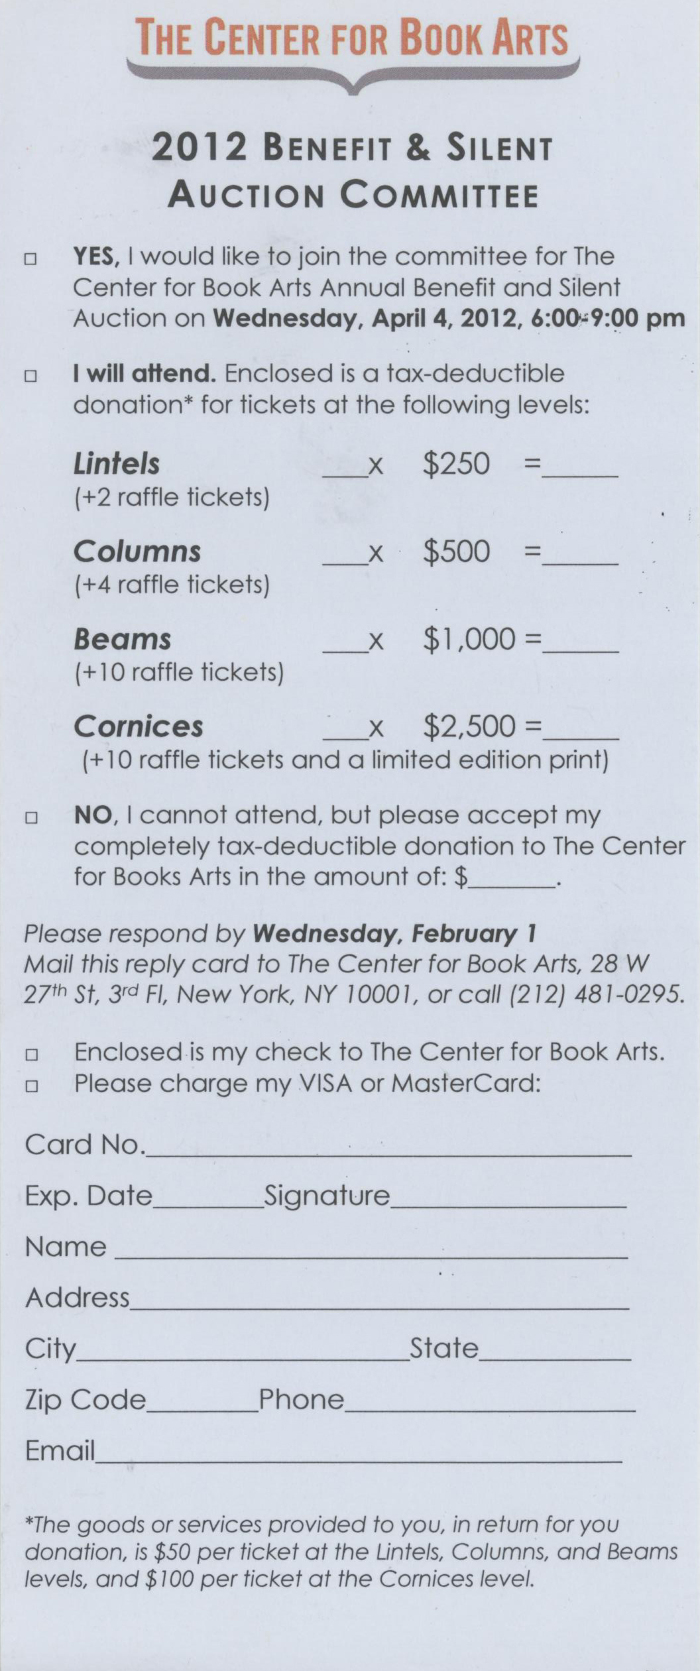 [RSVP card for the Center for Book Arts' 2012 annual benefit and silent auction]
